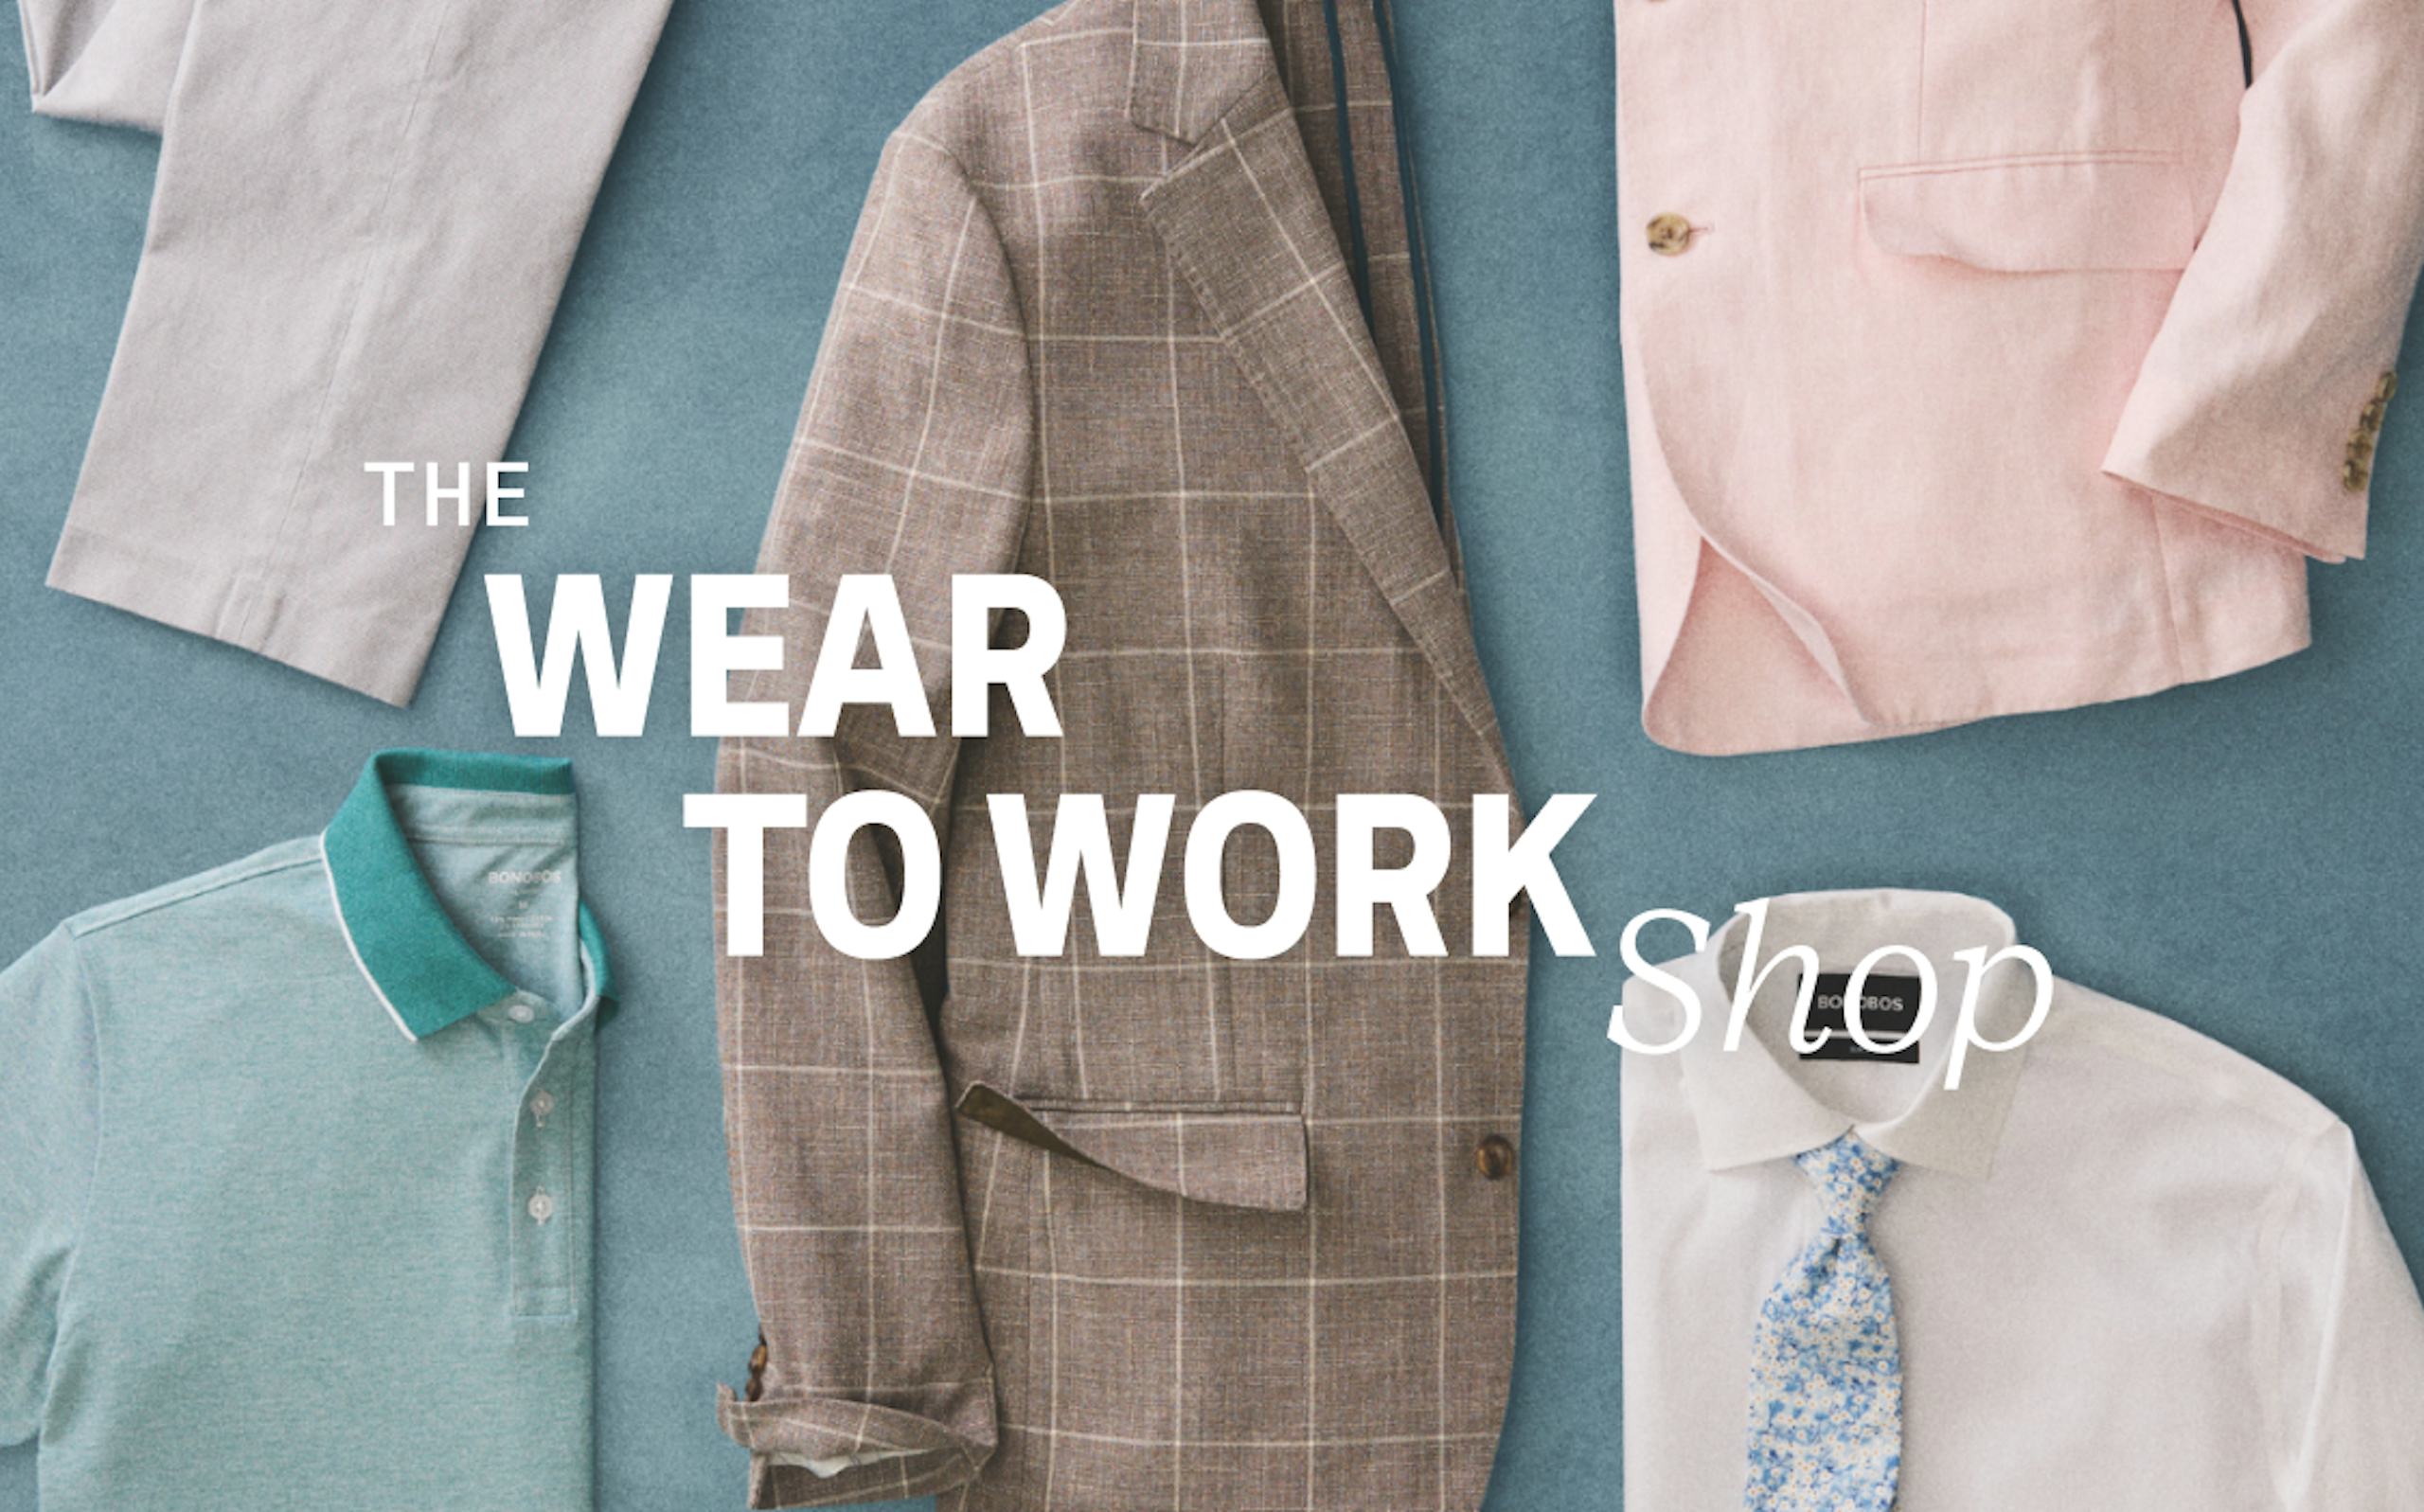 The Wear to Work Shop